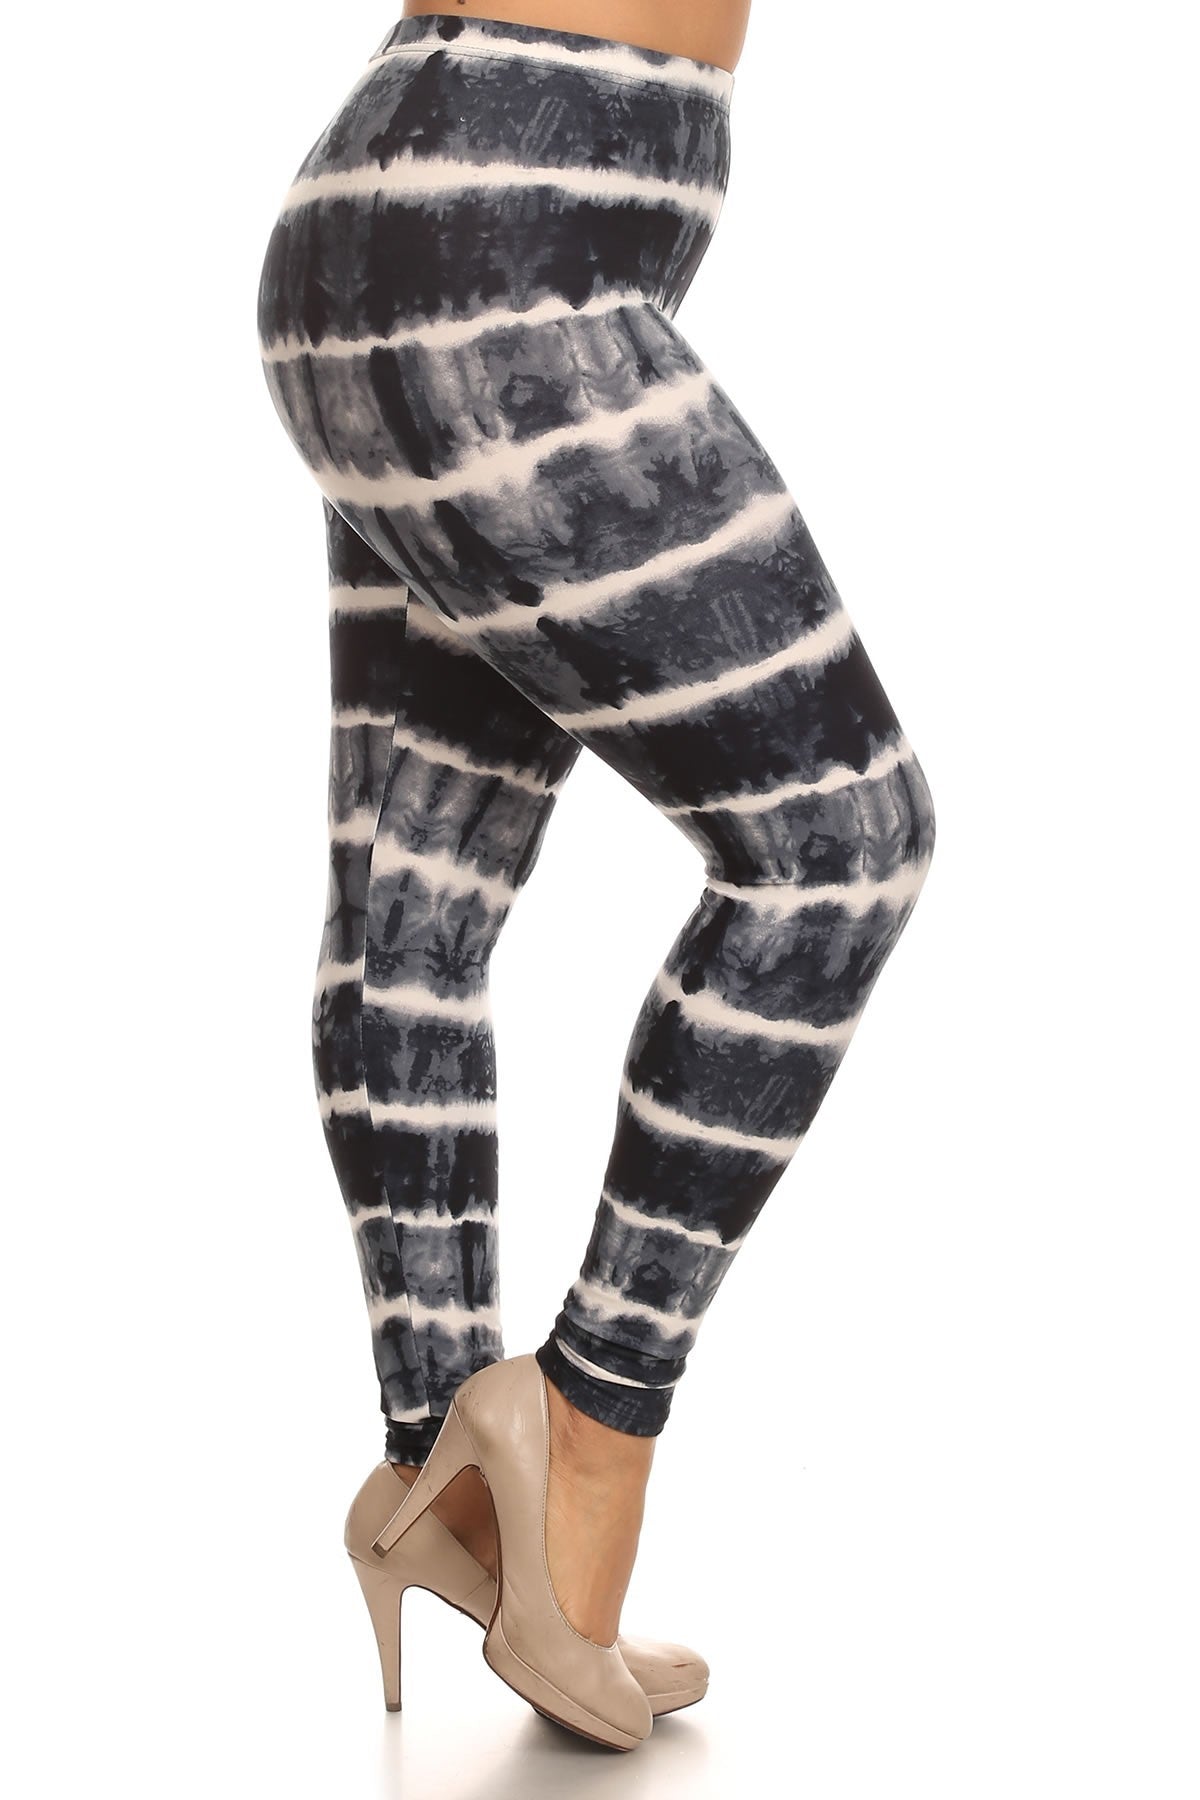 Tie Dye Print,Plus Size  Full Length Leggings In A Fitted Style With A Banded High Waist Girl Code 